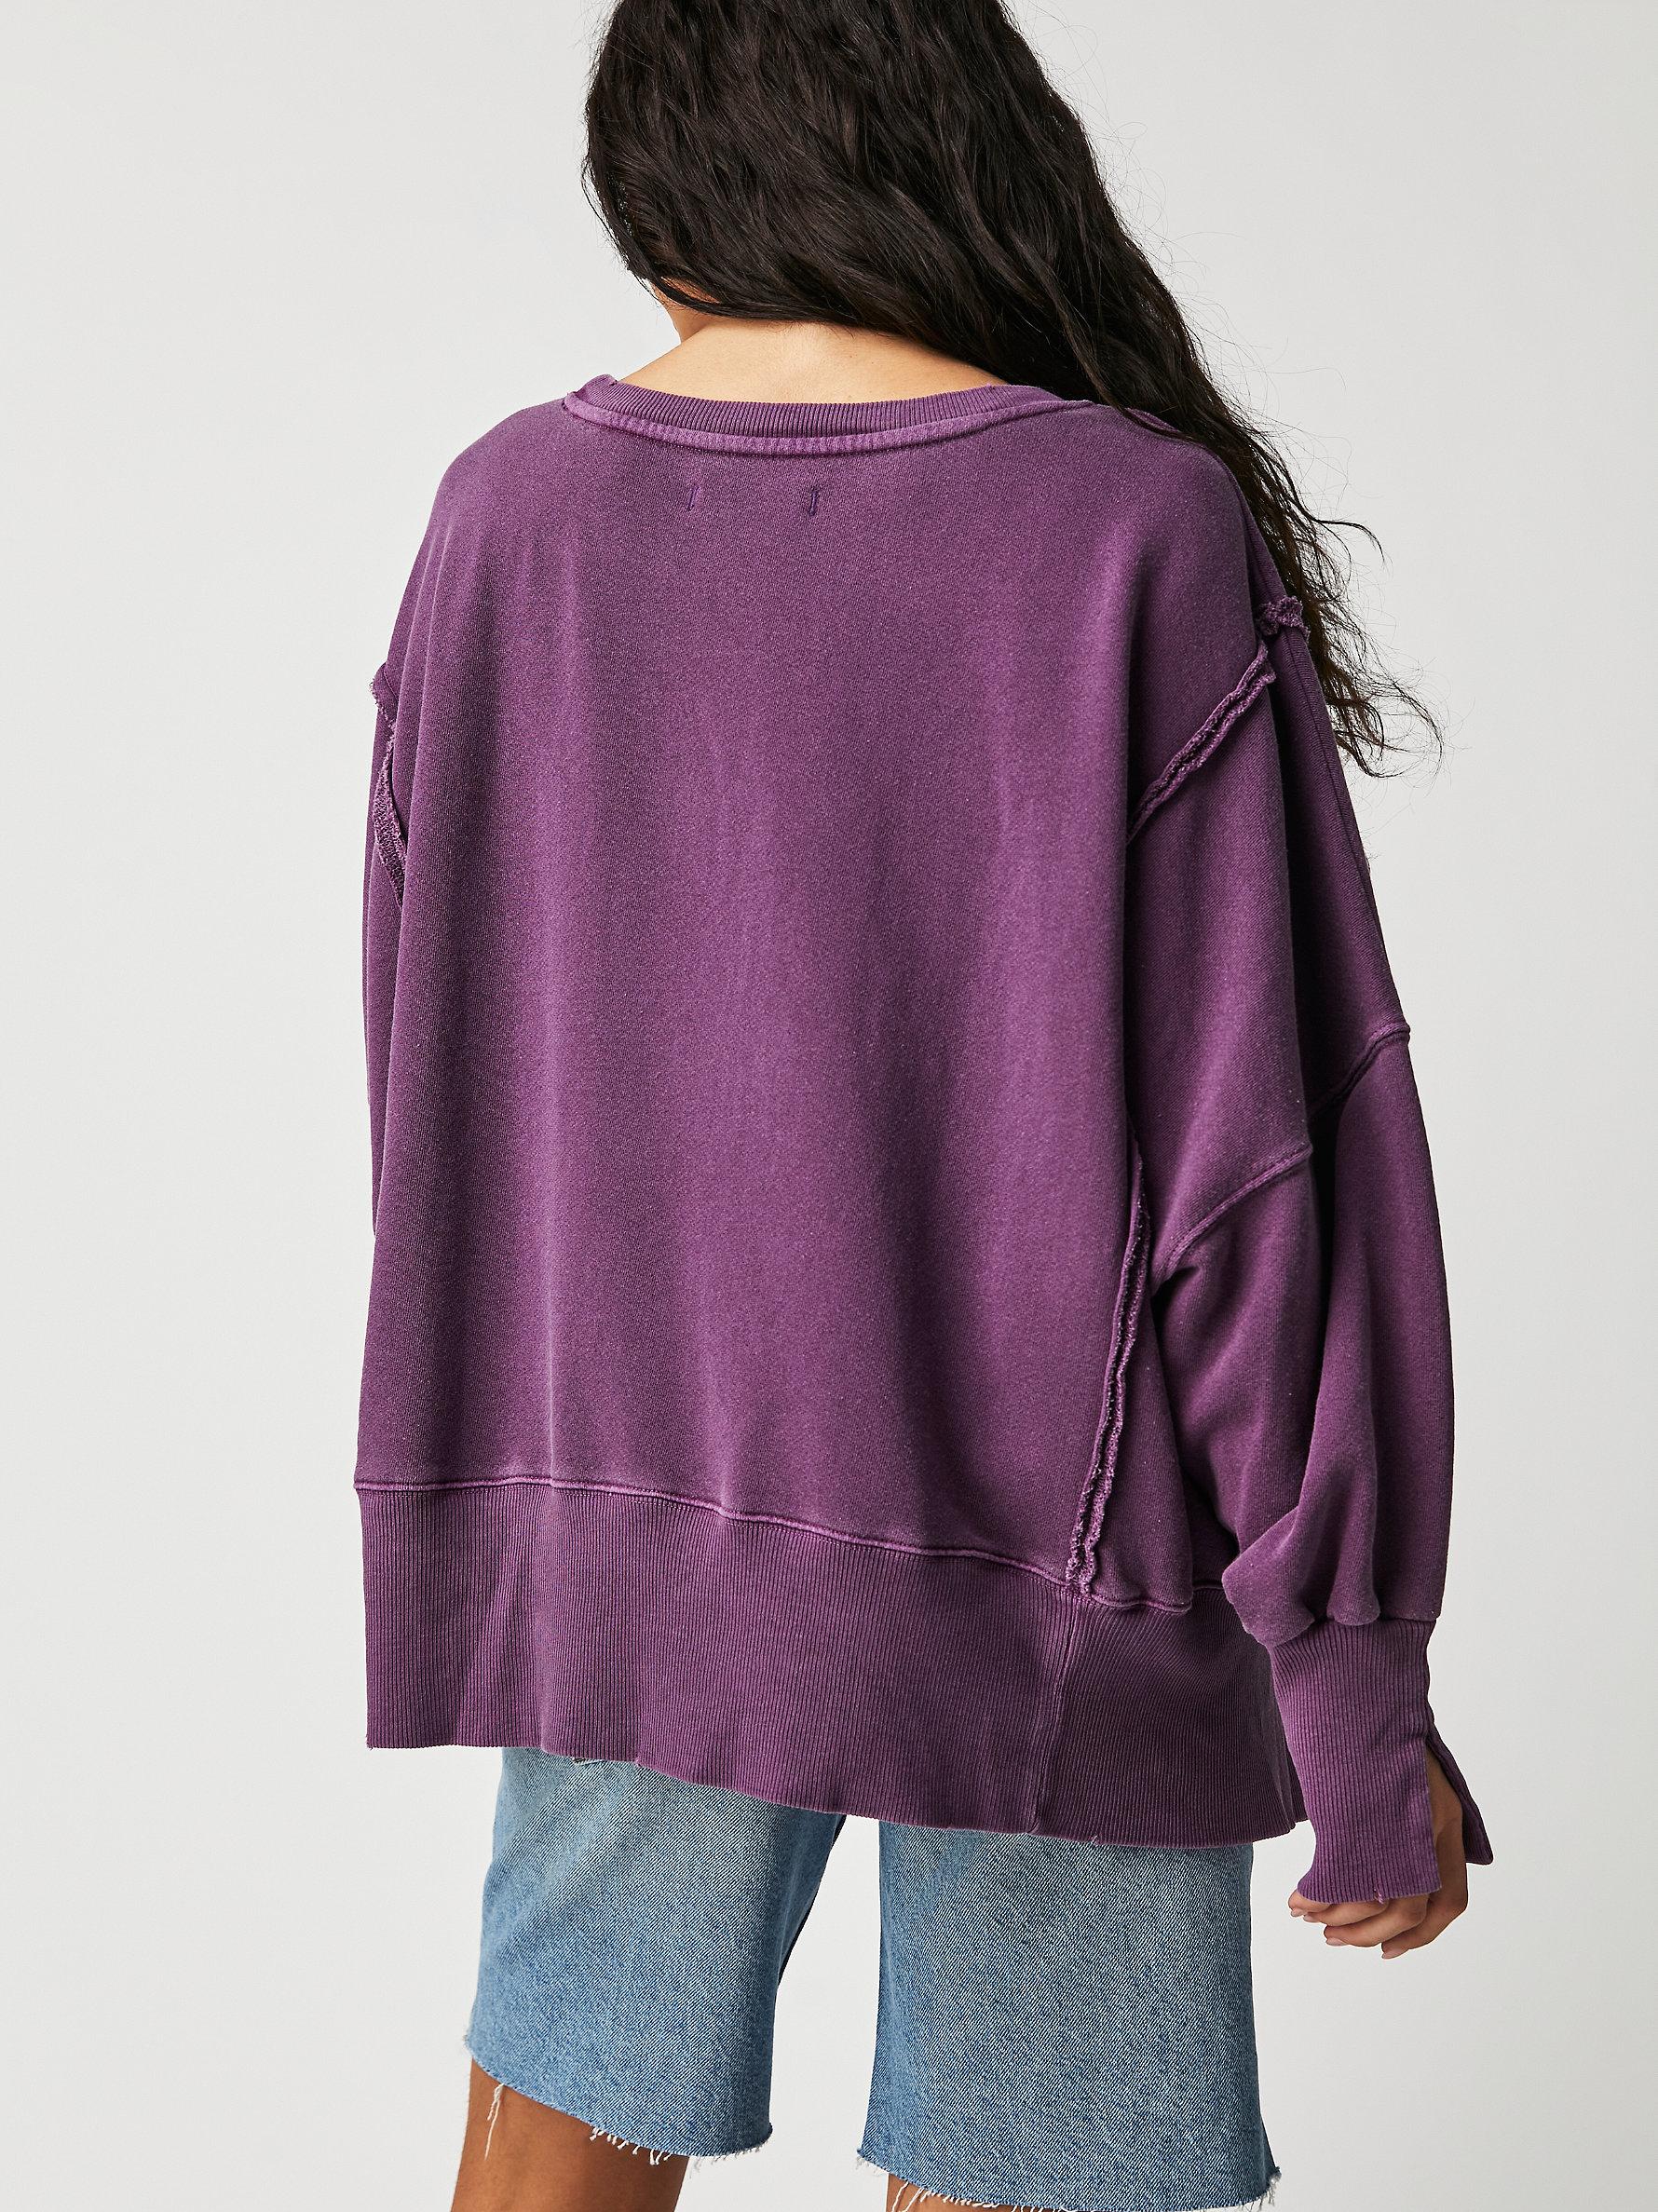 Free People Camden Sweatshirt Look for Less - Straight A Style